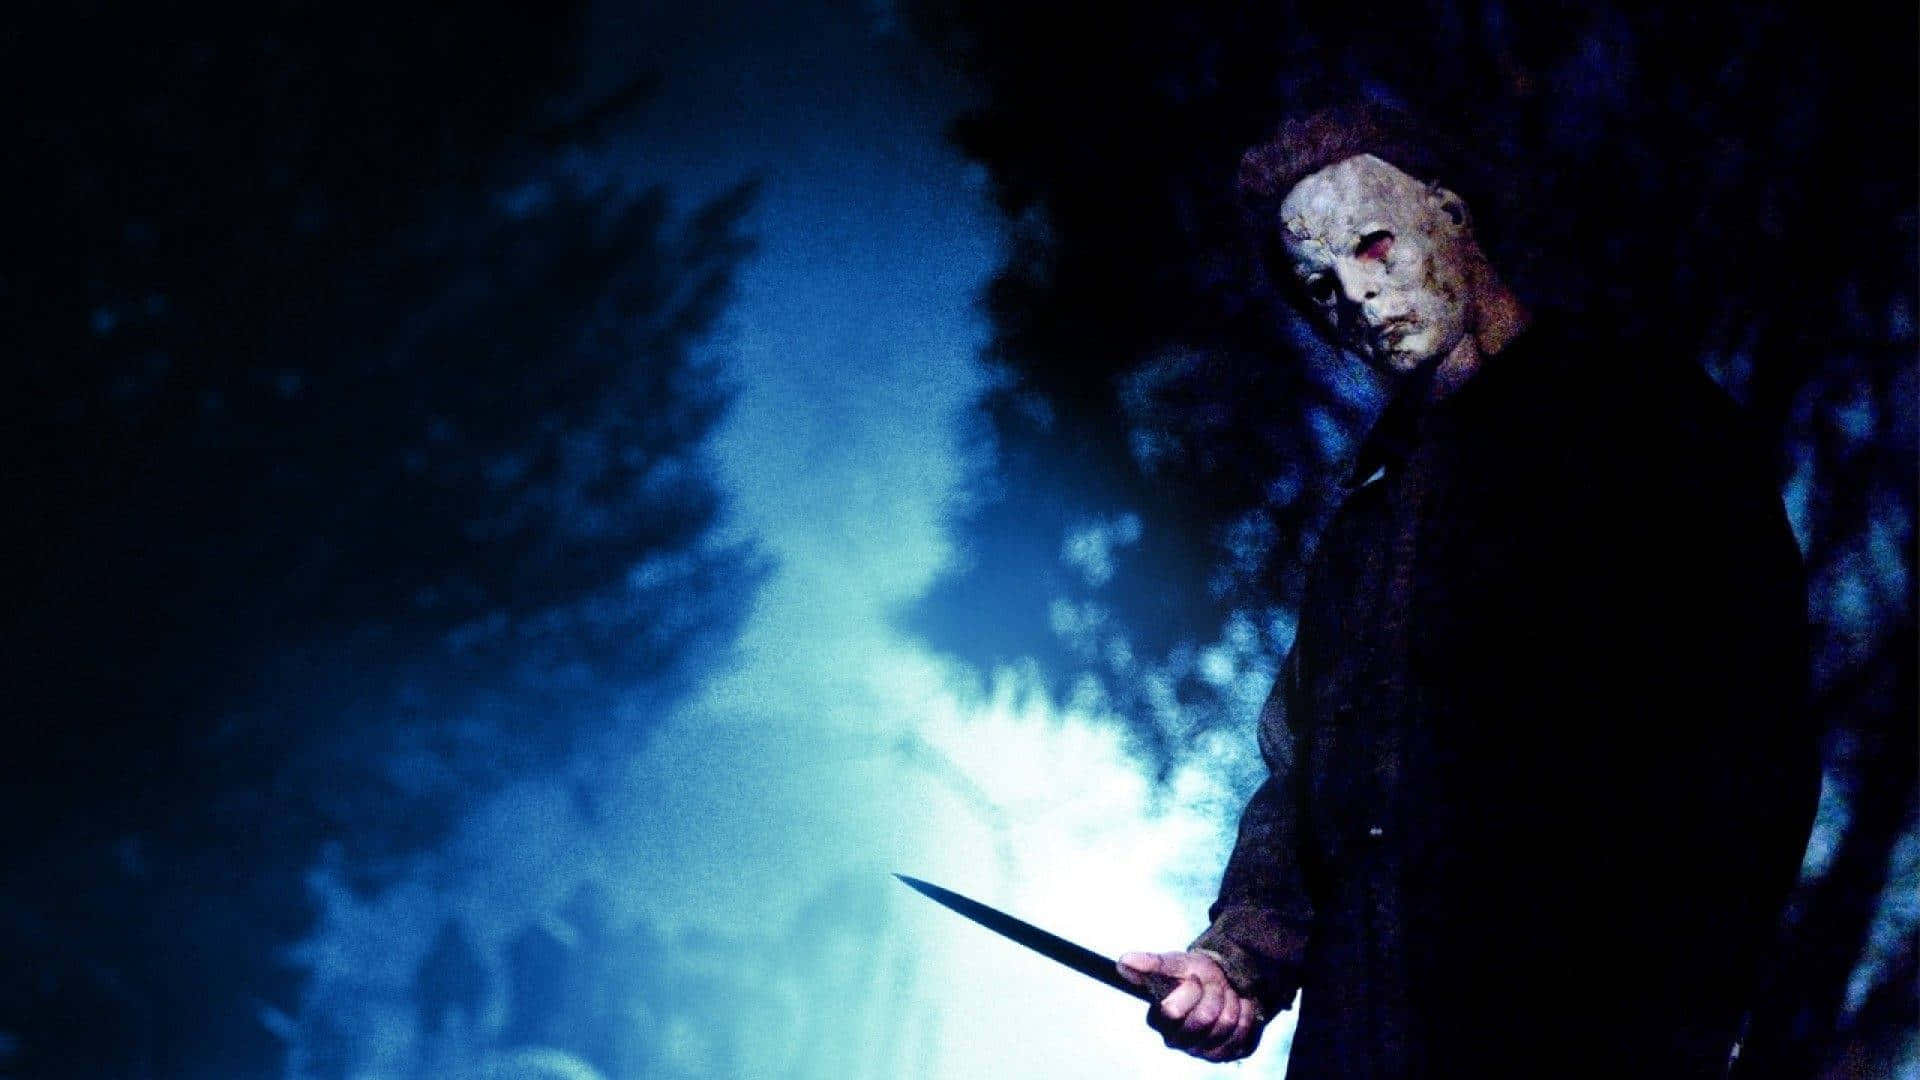 Cool Michael Myers with a knife and mask. Wallpaper